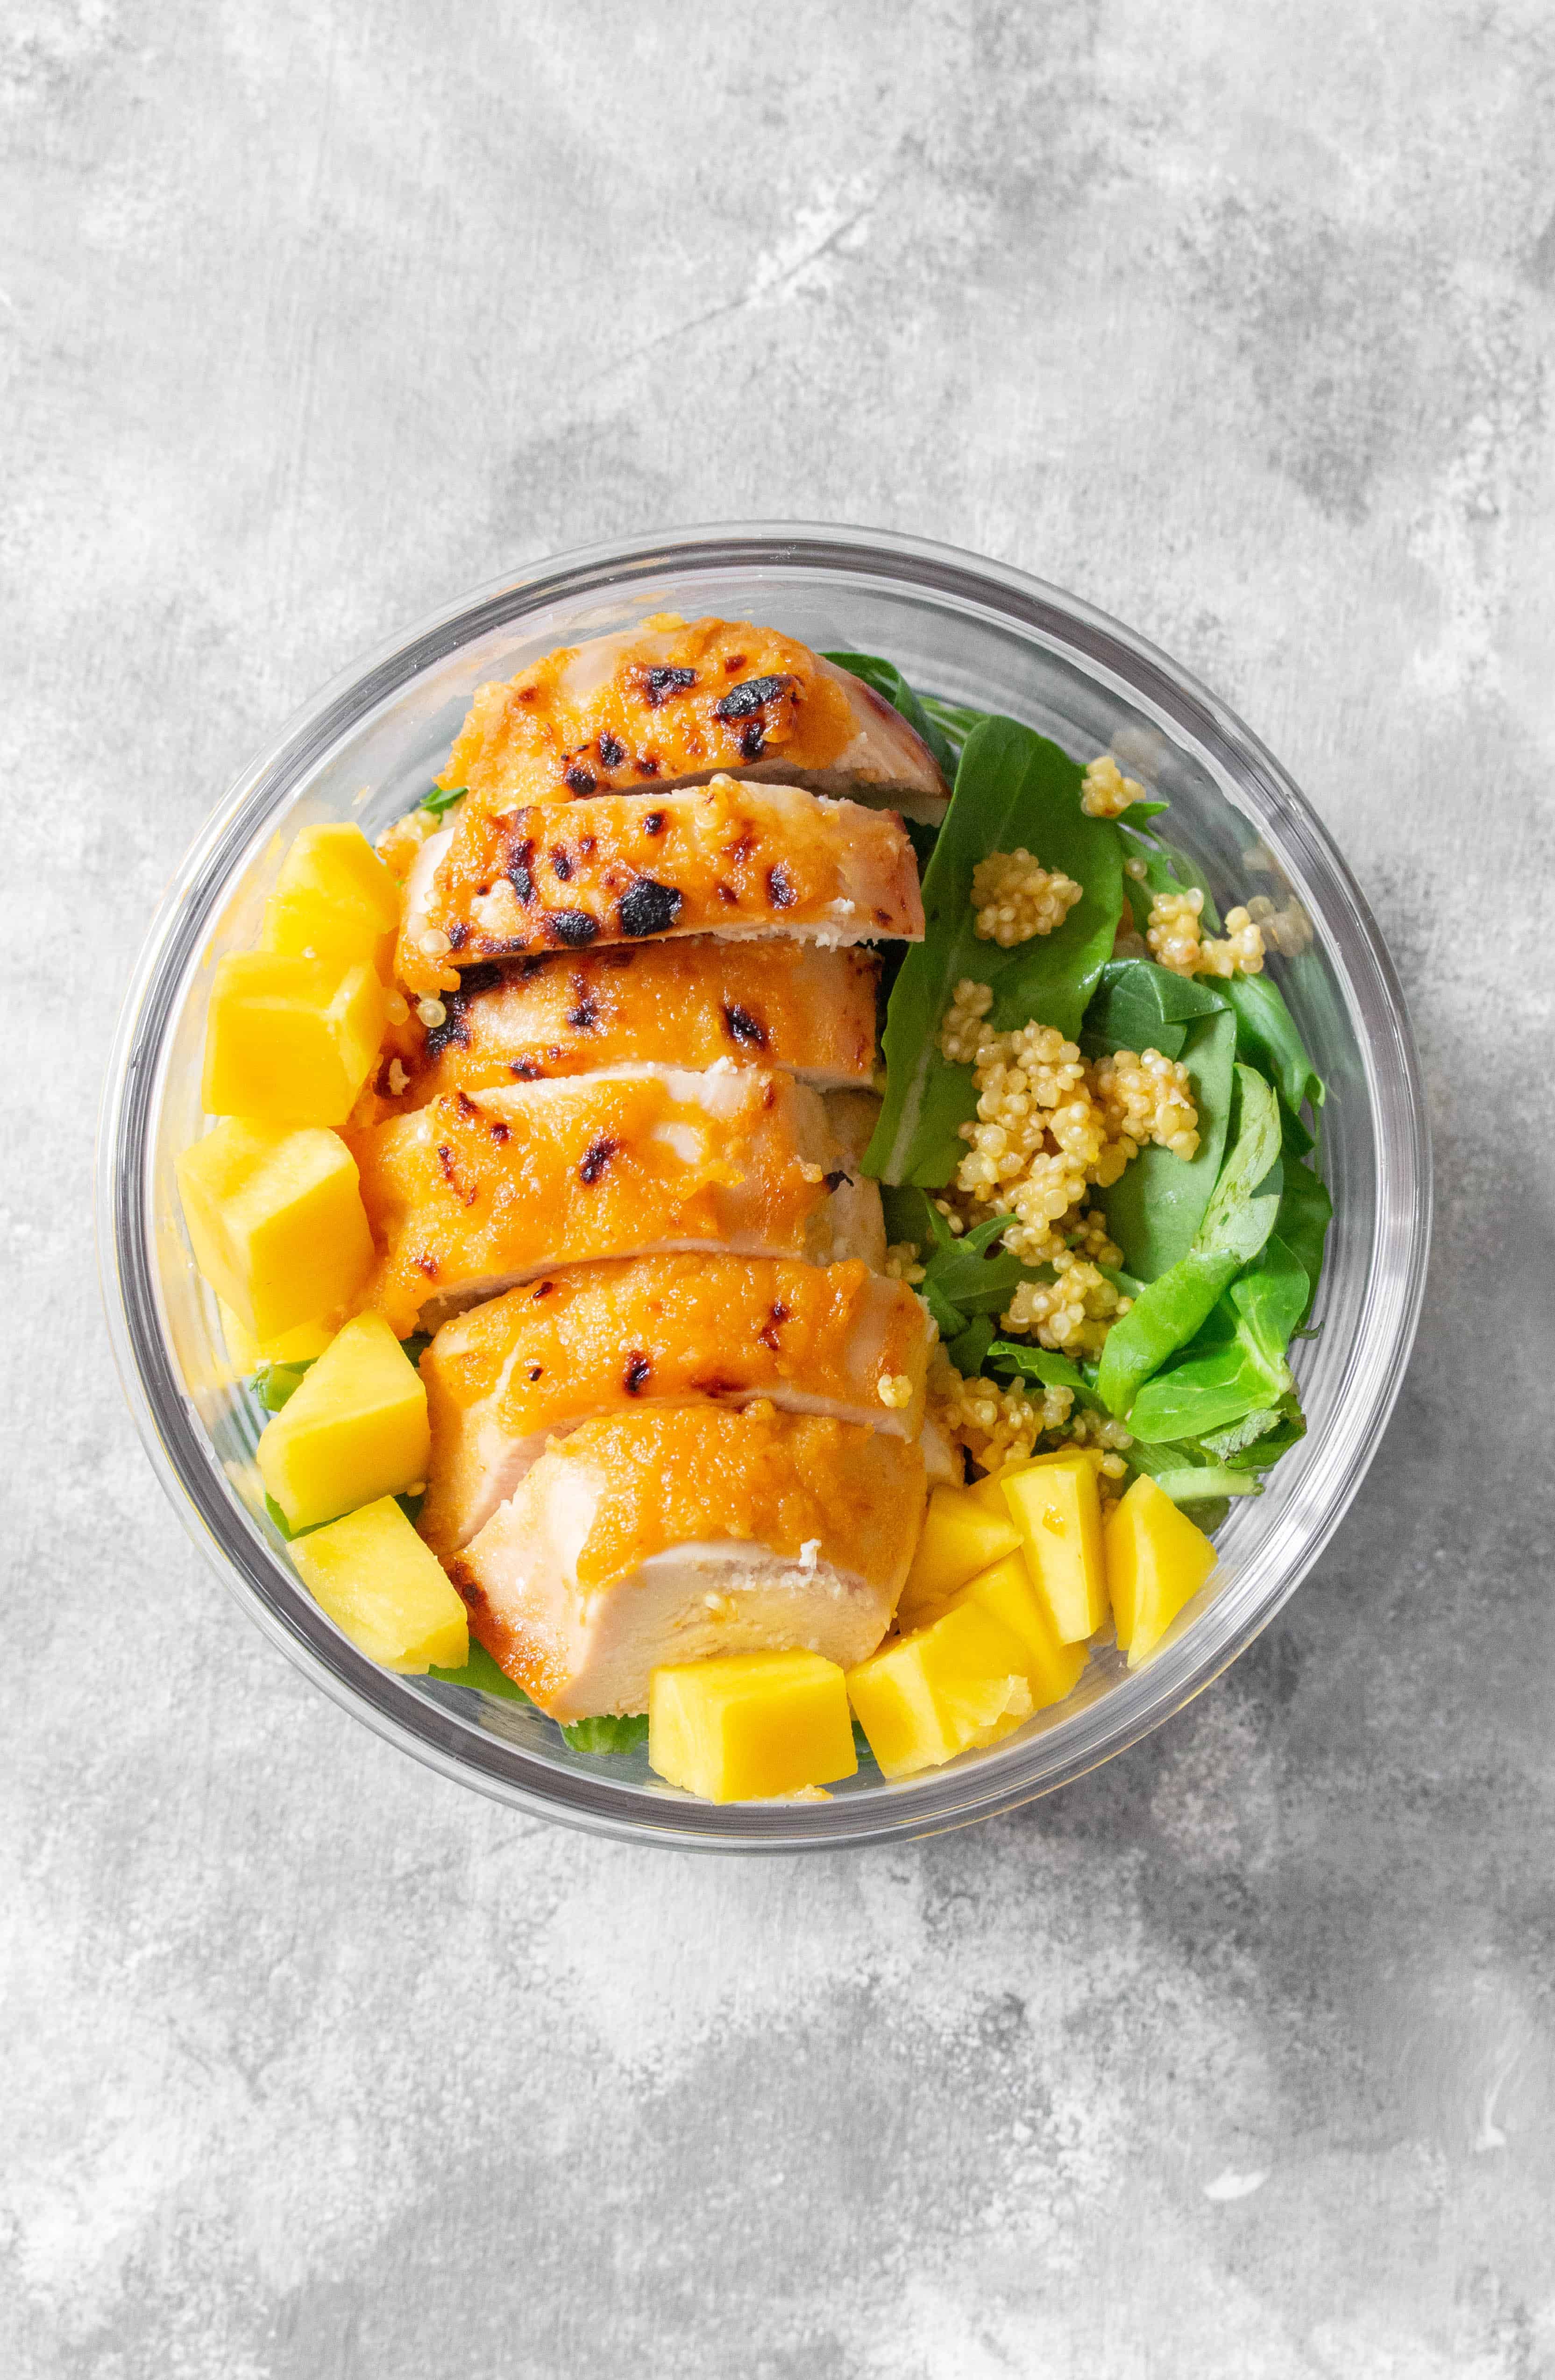 This easy Mango Chili Lime Chicken meal prep is coated with a sweet and spicy marinade. Delicious hot or cold.